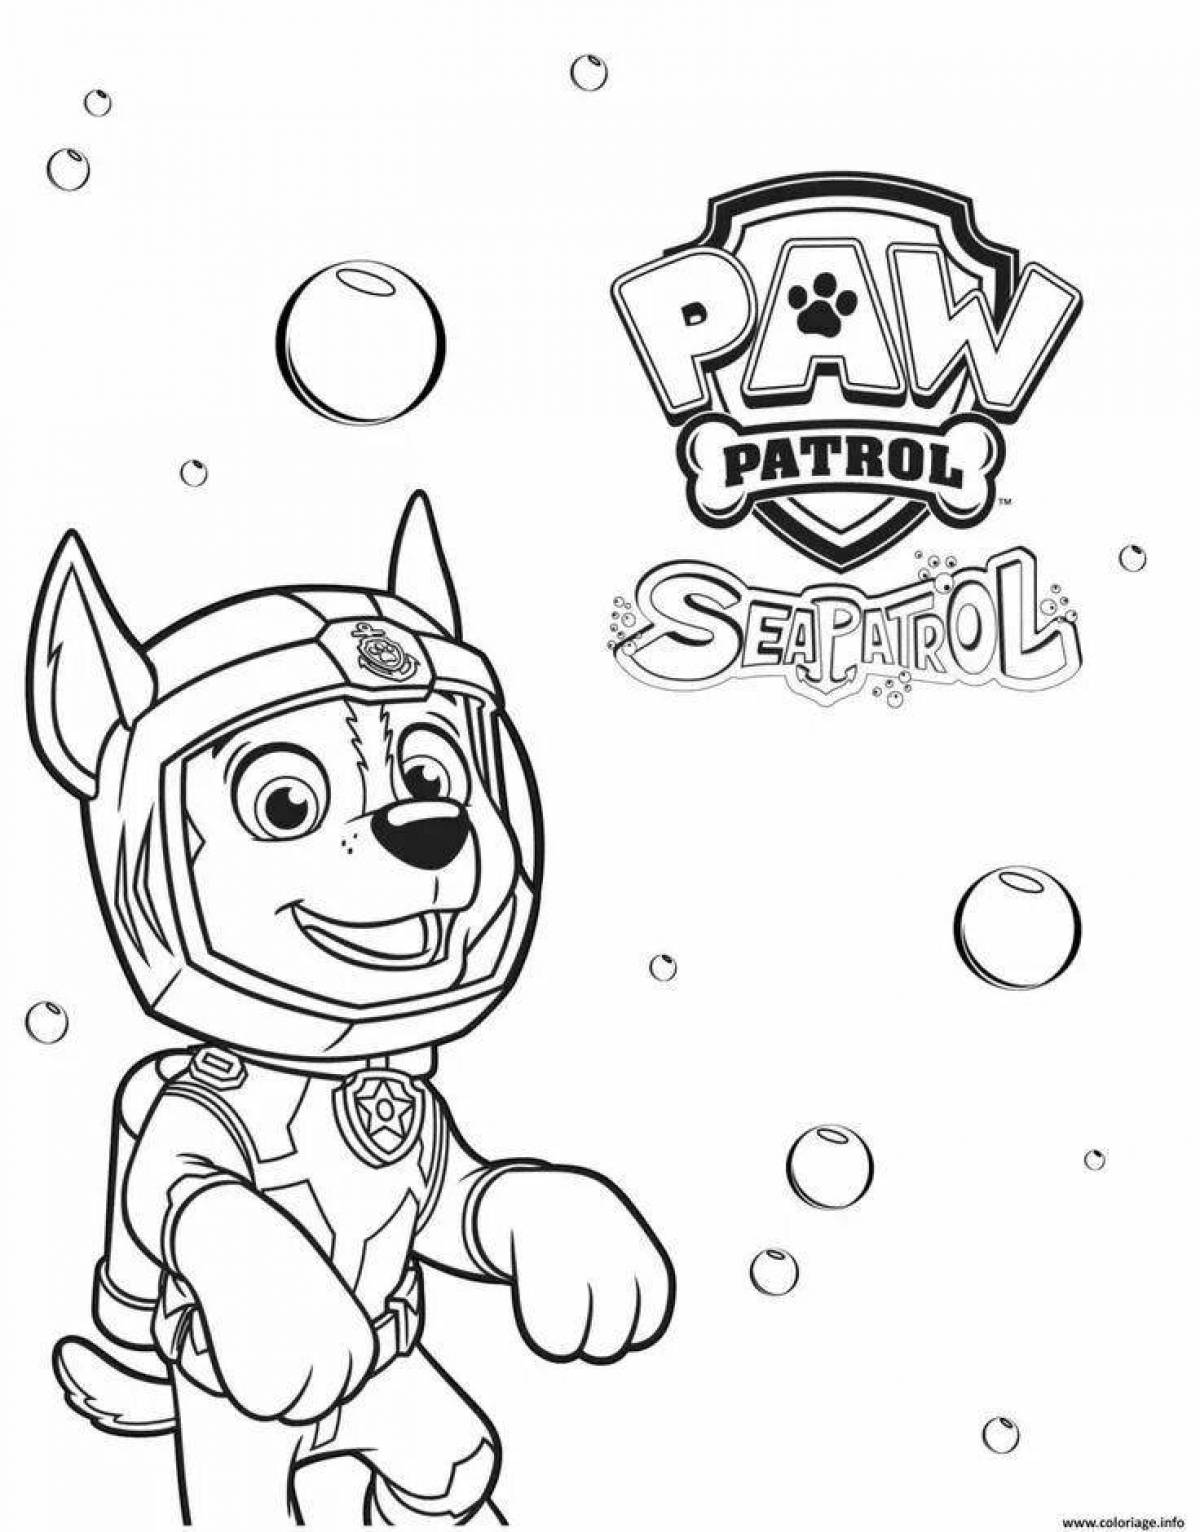 Great coloring paw patrol tracker